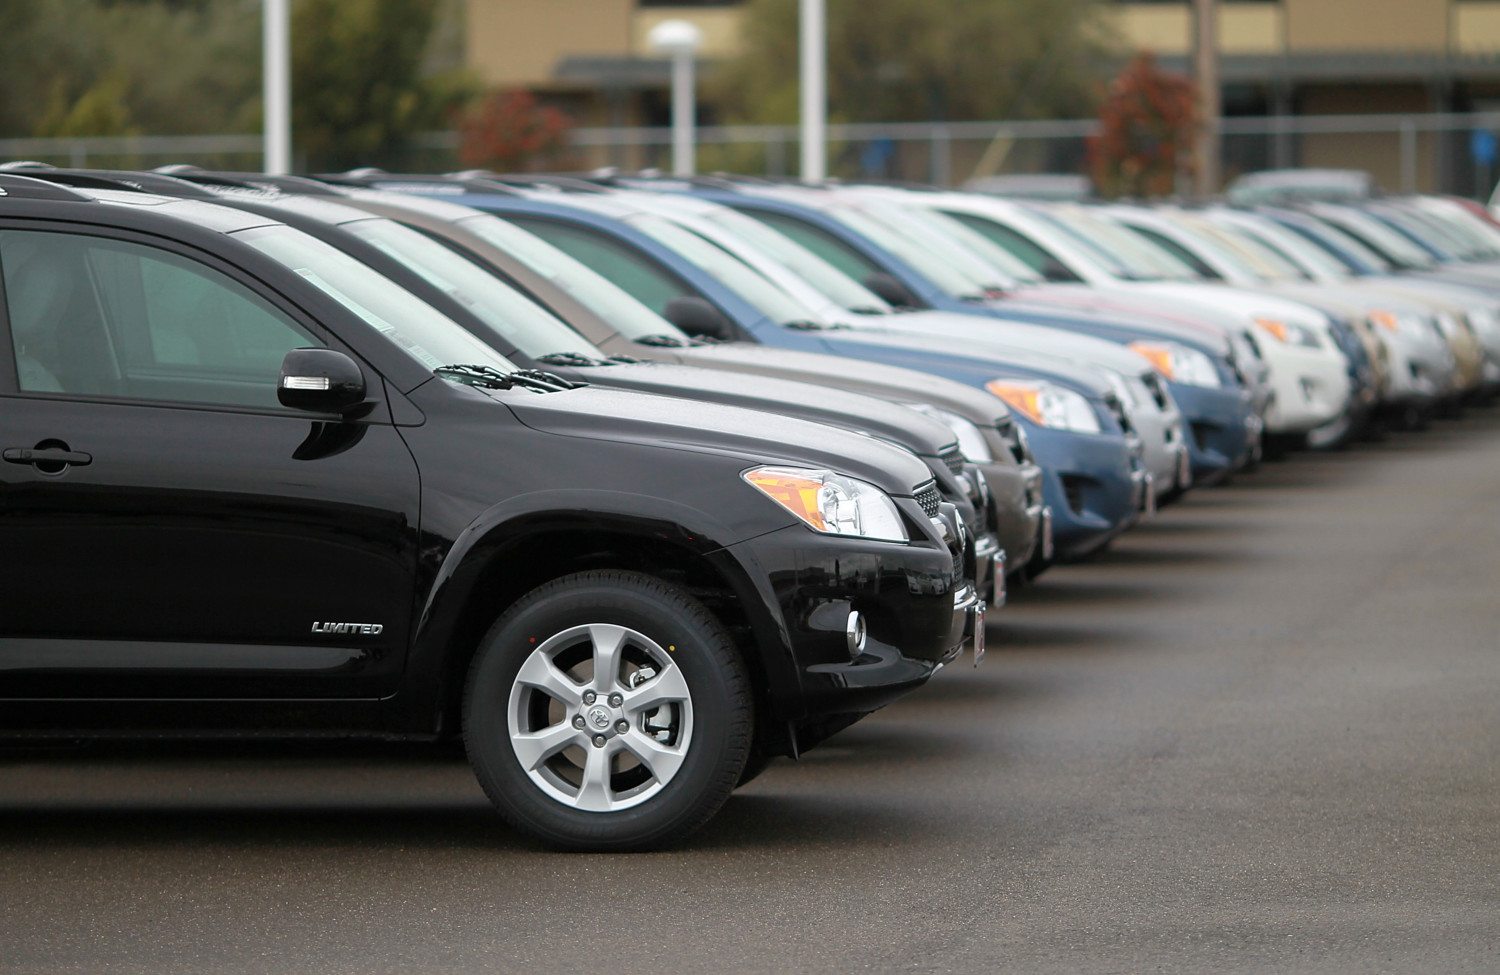 Toyota Recalls More Than 2 Million Vehicles In US